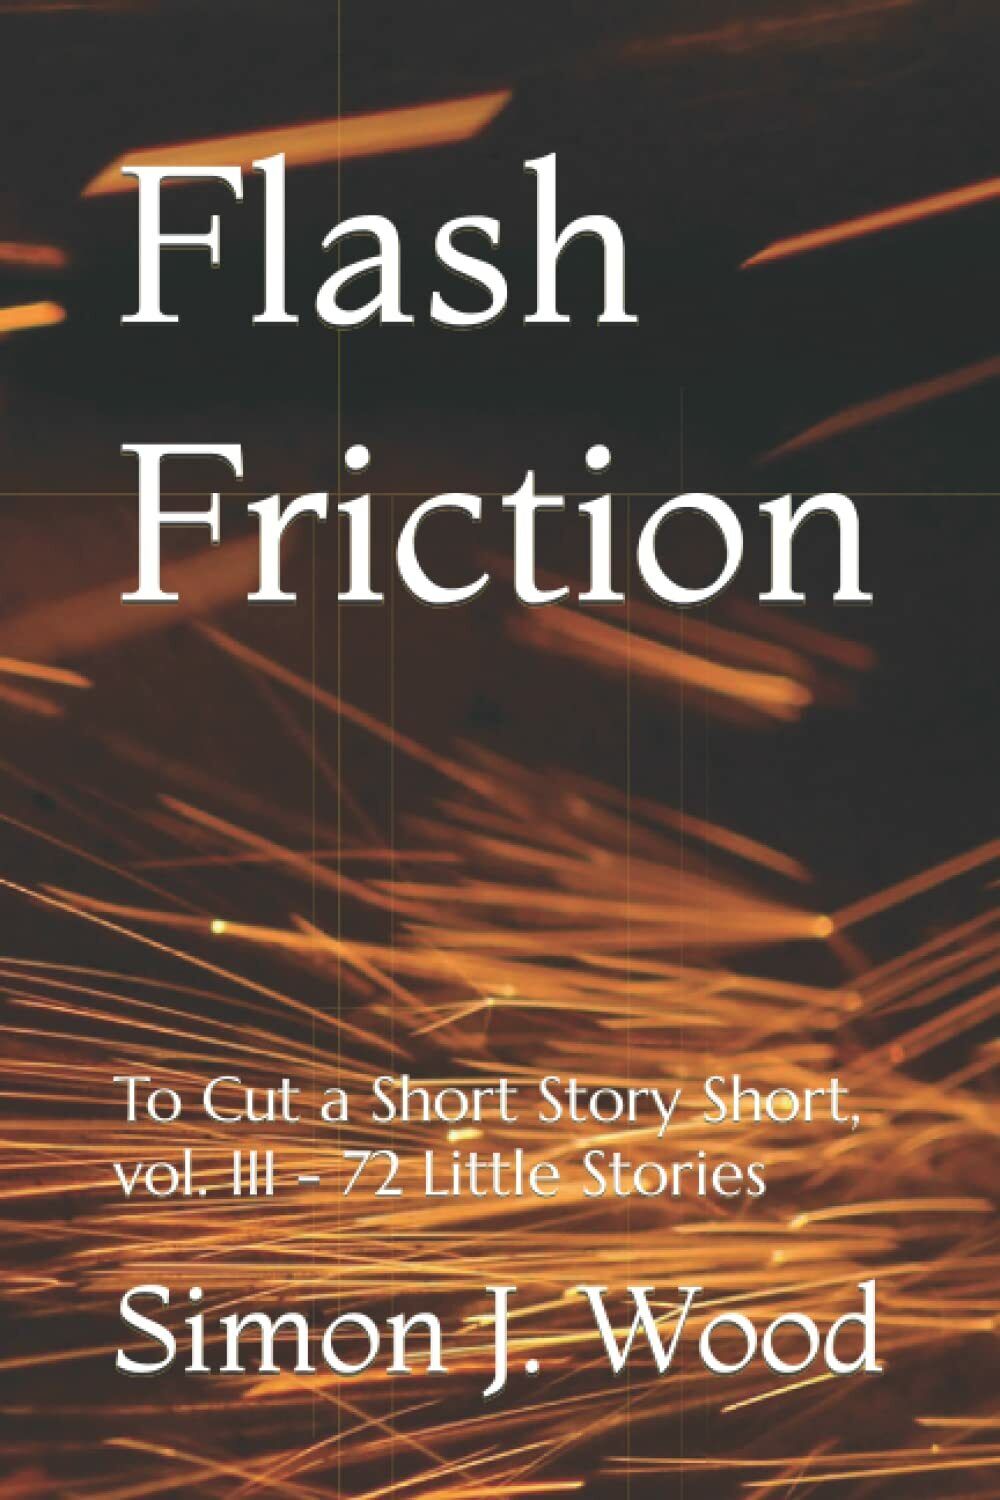 Flash Friction: To Cut a Short Story Short, vol. III - 72 Little Stories di Simo